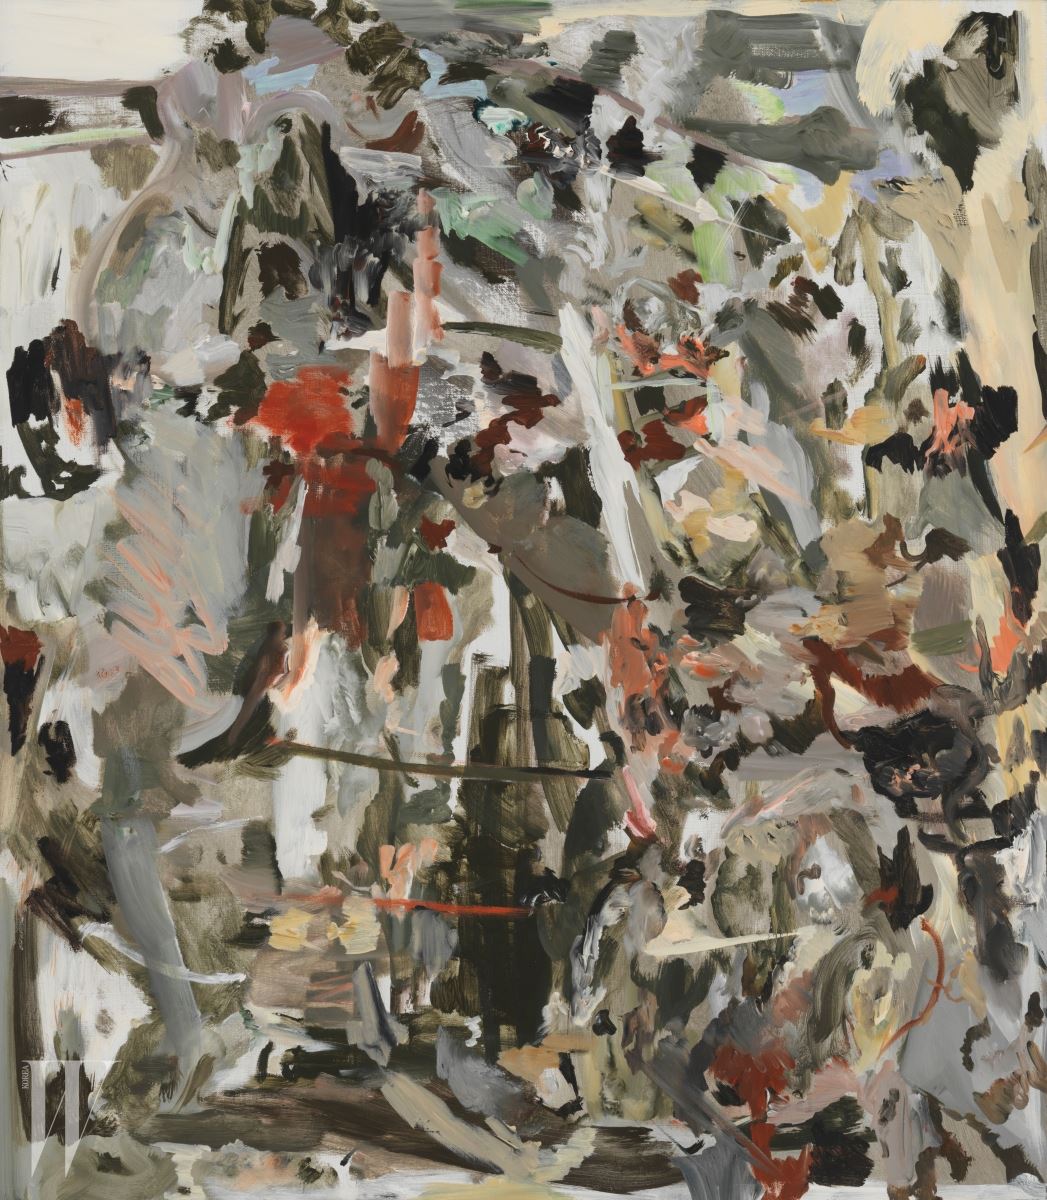 Surely We Have Bourne Our Griefs 2008-2010, Oil on linen, 63.5 x 55.9cm Courtesy of Cecily Brown and Kukje Gallery